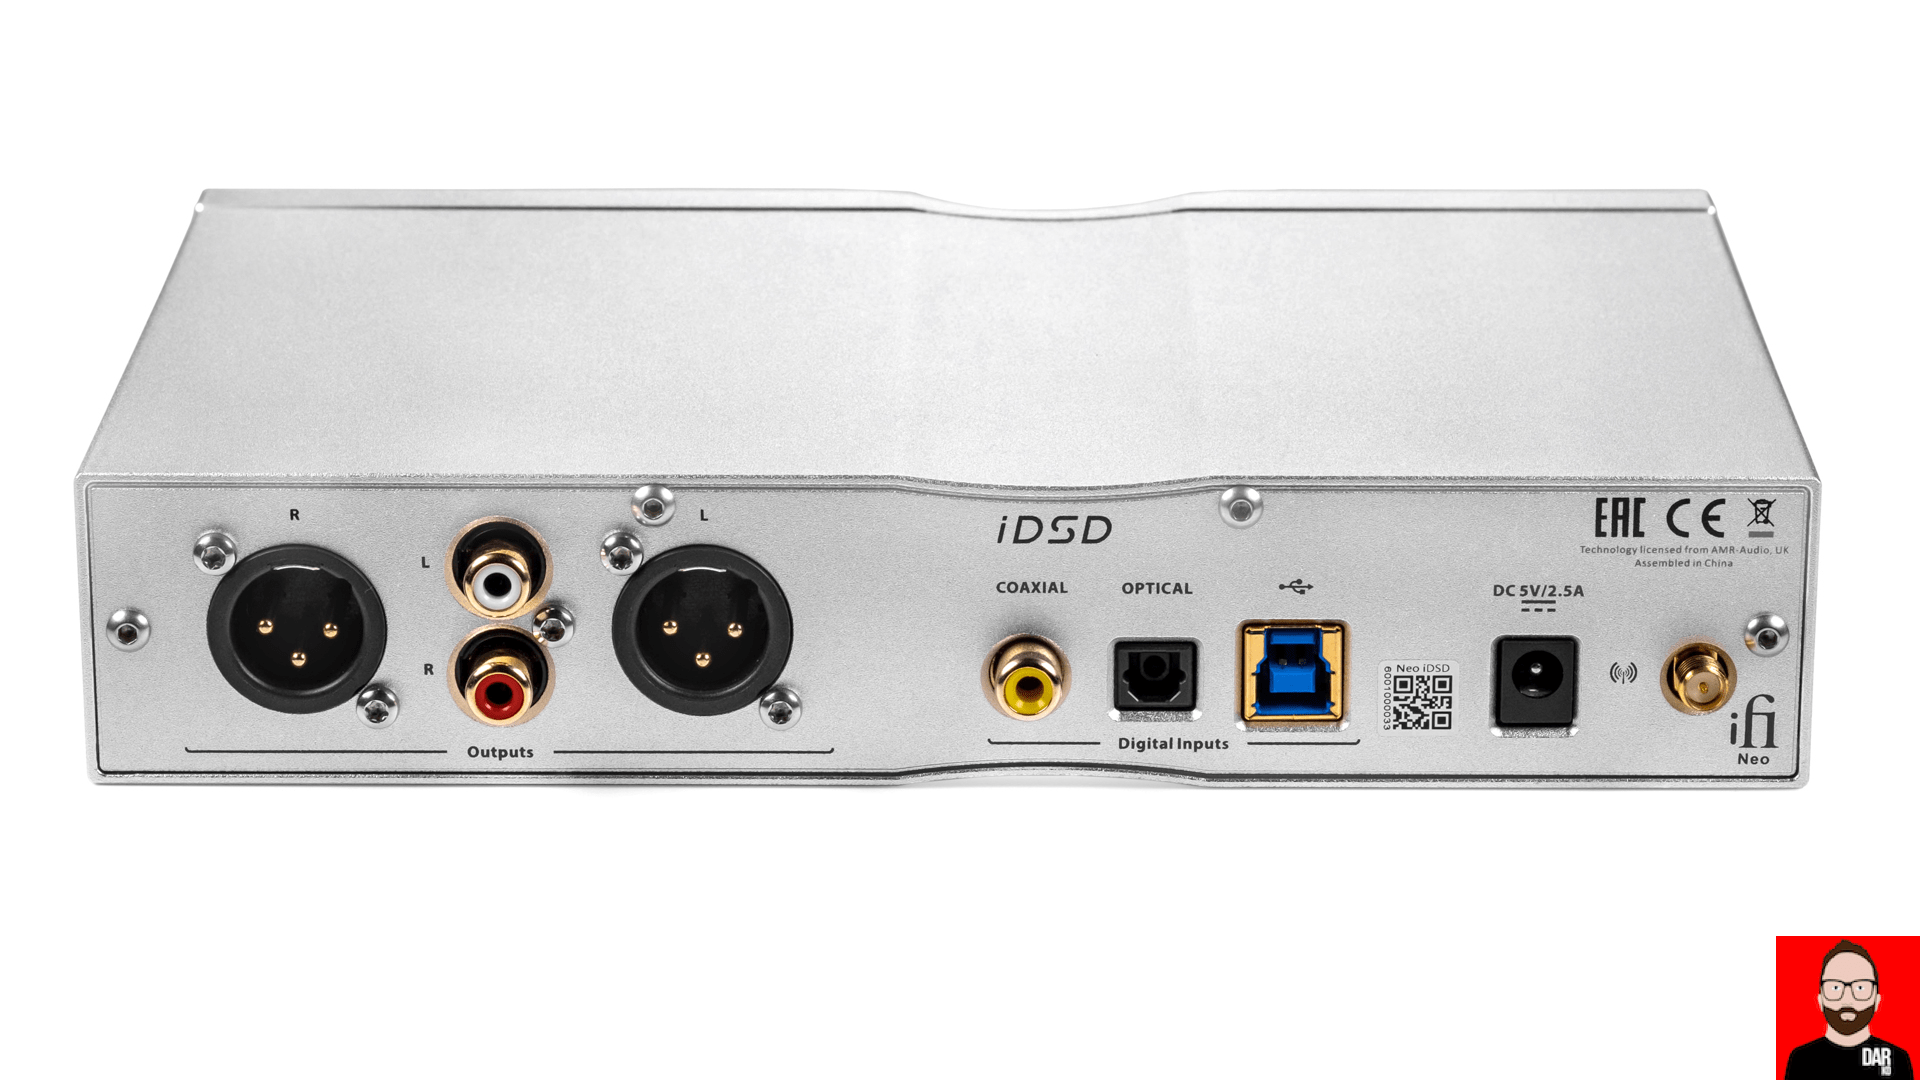 Review: ifi idsd diablo dac/amp – the devil is in the details - headphonesty